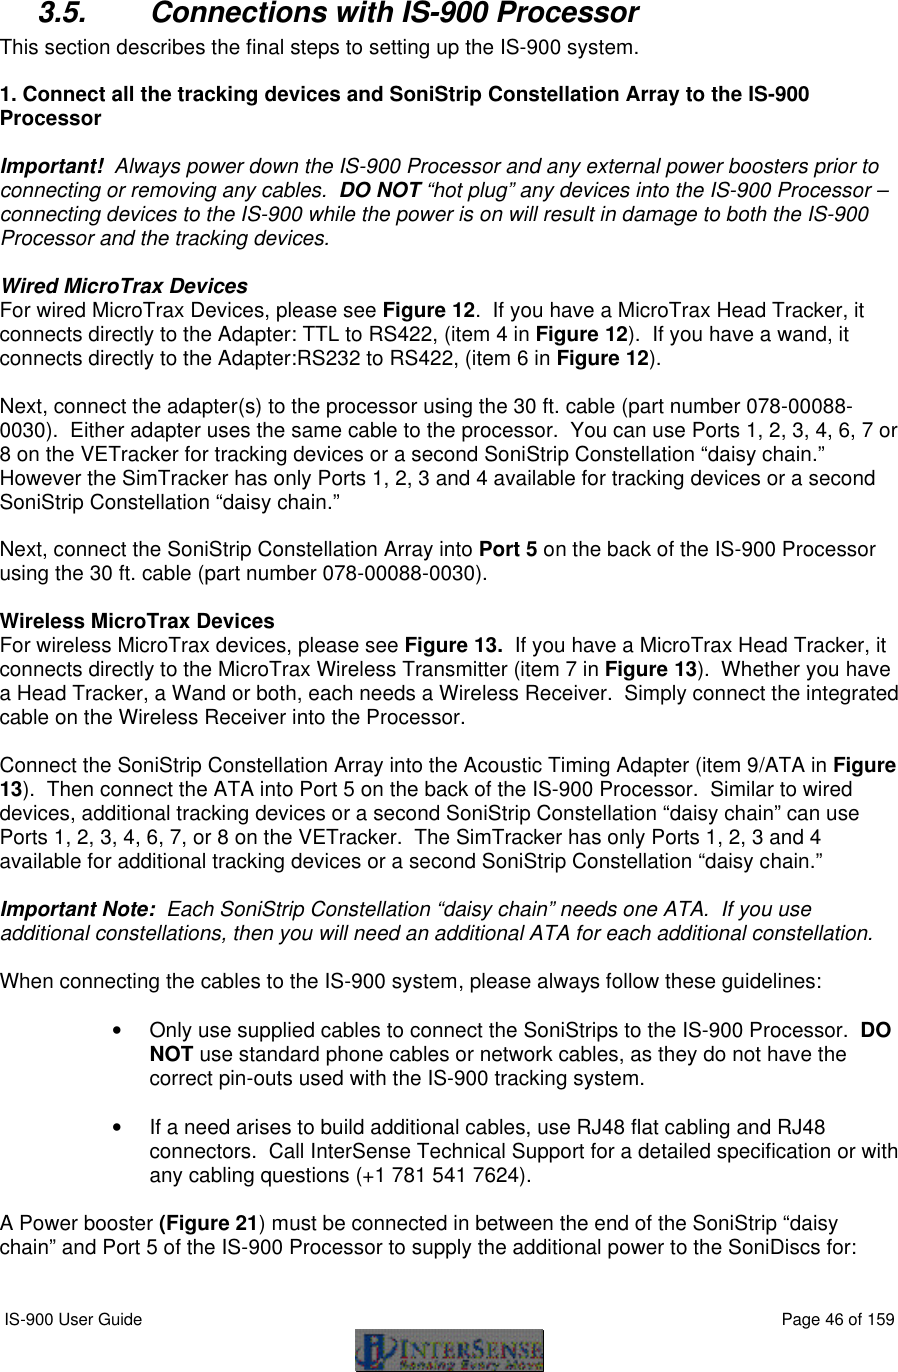  IS-900 User Guide                                                                                                                                          Page 46 of 159   3.5. Connections with IS-900 Processor This section describes the final steps to setting up the IS-900 system.  1. Connect all the tracking devices and SoniStrip Constellation Array to the IS-900 Processor  Important!  Always power down the IS-900 Processor and any external power boosters prior to connecting or removing any cables.  DO NOT “hot plug” any devices into the IS-900 Processor – connecting devices to the IS-900 while the power is on will result in damage to both the IS-900 Processor and the tracking devices.  Wired MicroTrax Devices For wired MicroTrax Devices, please see Figure 12.  If you have a MicroTrax Head Tracker, it connects directly to the Adapter: TTL to RS422, (item 4 in Figure 12).  If you have a wand, it connects directly to the Adapter:RS232 to RS422, (item 6 in Figure 12).     Next, connect the adapter(s) to the processor using the 30 ft. cable (part number 078-00088-0030).  Either adapter uses the same cable to the processor.  You can use Ports 1, 2, 3, 4, 6, 7 or 8 on the VETracker for tracking devices or a second SoniStrip Constellation “daisy chain.”  However the SimTracker has only Ports 1, 2, 3 and 4 available for tracking devices or a second SoniStrip Constellation “daisy chain.”  Next, connect the SoniStrip Constellation Array into Port 5 on the back of the IS-900 Processor using the 30 ft. cable (part number 078-00088-0030).    Wireless MicroTrax Devices For wireless MicroTrax devices, please see Figure 13.  If you have a MicroTrax Head Tracker, it connects directly to the MicroTrax Wireless Transmitter (item 7 in Figure 13).  Whether you have a Head Tracker, a Wand or both, each needs a Wireless Receiver.  Simply connect the integrated cable on the Wireless Receiver into the Processor.  Connect the SoniStrip Constellation Array into the Acoustic Timing Adapter (item 9/ATA in Figure 13).  Then connect the ATA into Port 5 on the back of the IS-900 Processor.  Similar to wired devices, additional tracking devices or a second SoniStrip Constellation “daisy chain” can use Ports 1, 2, 3, 4, 6, 7, or 8 on the VETracker.  The SimTracker has only Ports 1, 2, 3 and 4 available for additional tracking devices or a second SoniStrip Constellation “daisy chain.”  Important Note:  Each SoniStrip Constellation “daisy chain” needs one ATA.  If you use additional constellations, then you will need an additional ATA for each additional constellation.  When connecting the cables to the IS-900 system, please always follow these guidelines:  • Only use supplied cables to connect the SoniStrips to the IS-900 Processor.  DO NOT use standard phone cables or network cables, as they do not have the correct pin-outs used with the IS-900 tracking system.   • If a need arises to build additional cables, use RJ48 flat cabling and RJ48 connectors.  Call InterSense Technical Support for a detailed specification or with any cabling questions (+1 781 541 7624).  A Power booster (Figure 21) must be connected in between the end of the SoniStrip “daisy chain” and Port 5 of the IS-900 Processor to supply the additional power to the SoniDiscs for:  